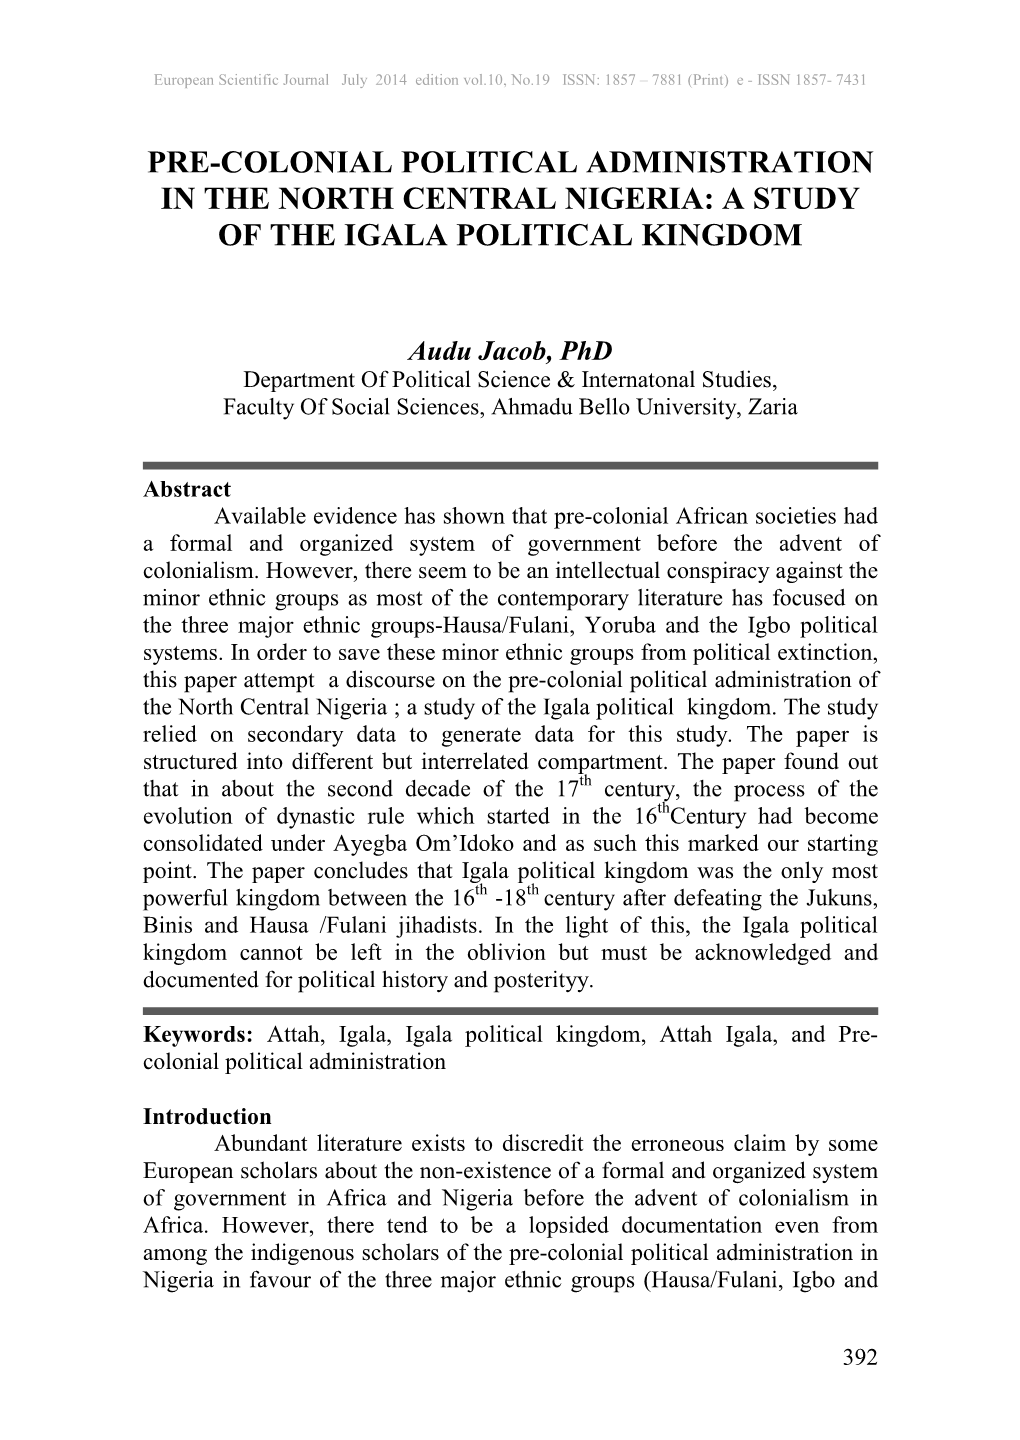 Pre-Colonial Political Administration in the North Central Nigeria: a Study of the Igala Political Kingdom